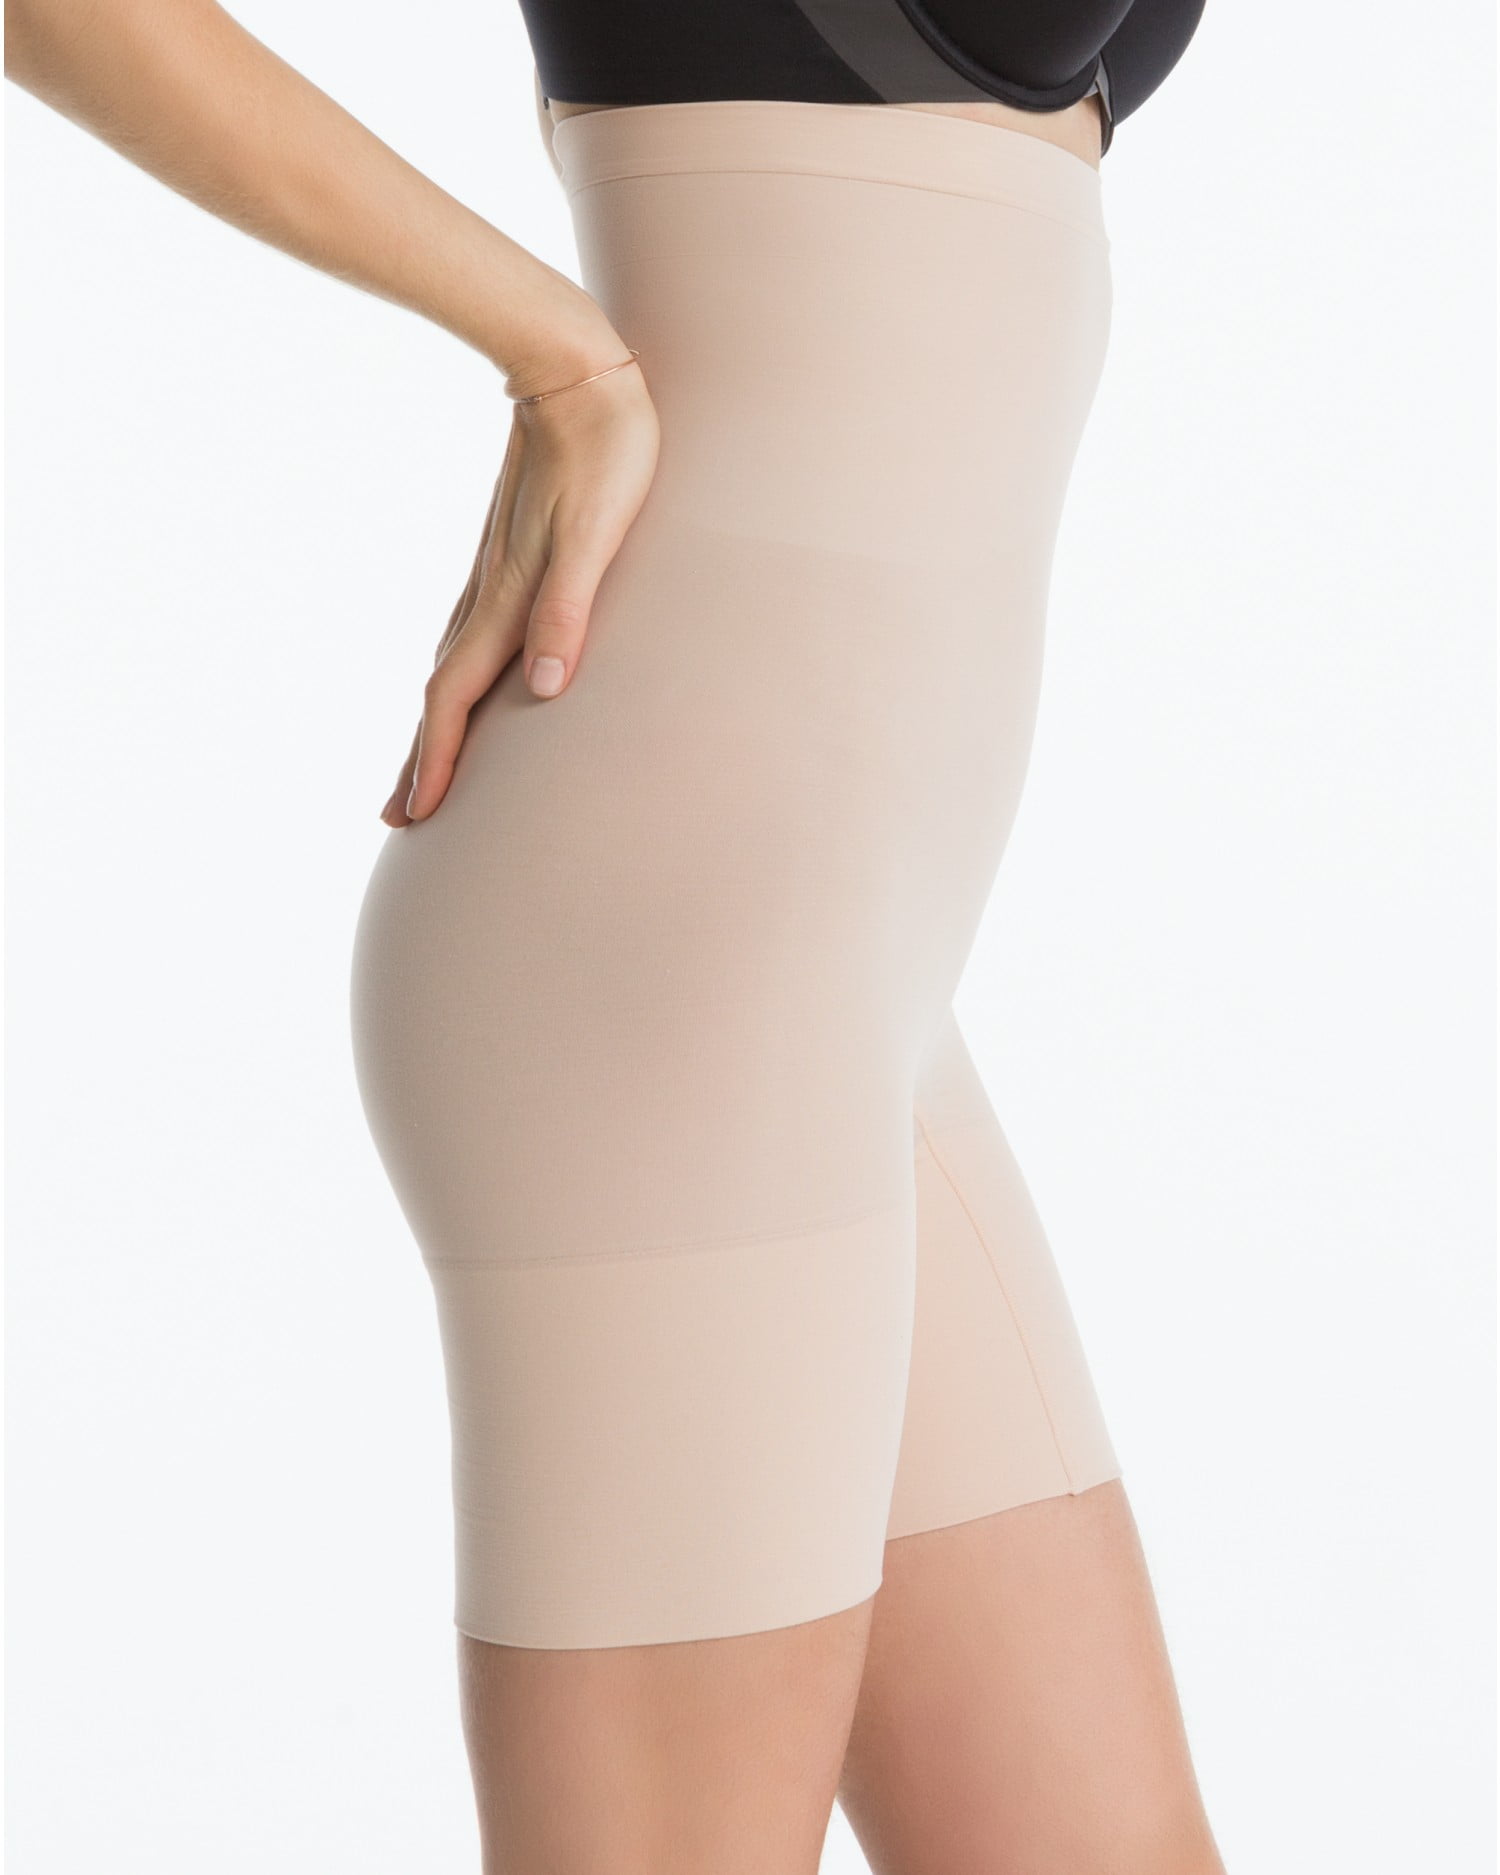 SPANX HIGHER POWER SHORT IN SOFT NUDE SZ M 